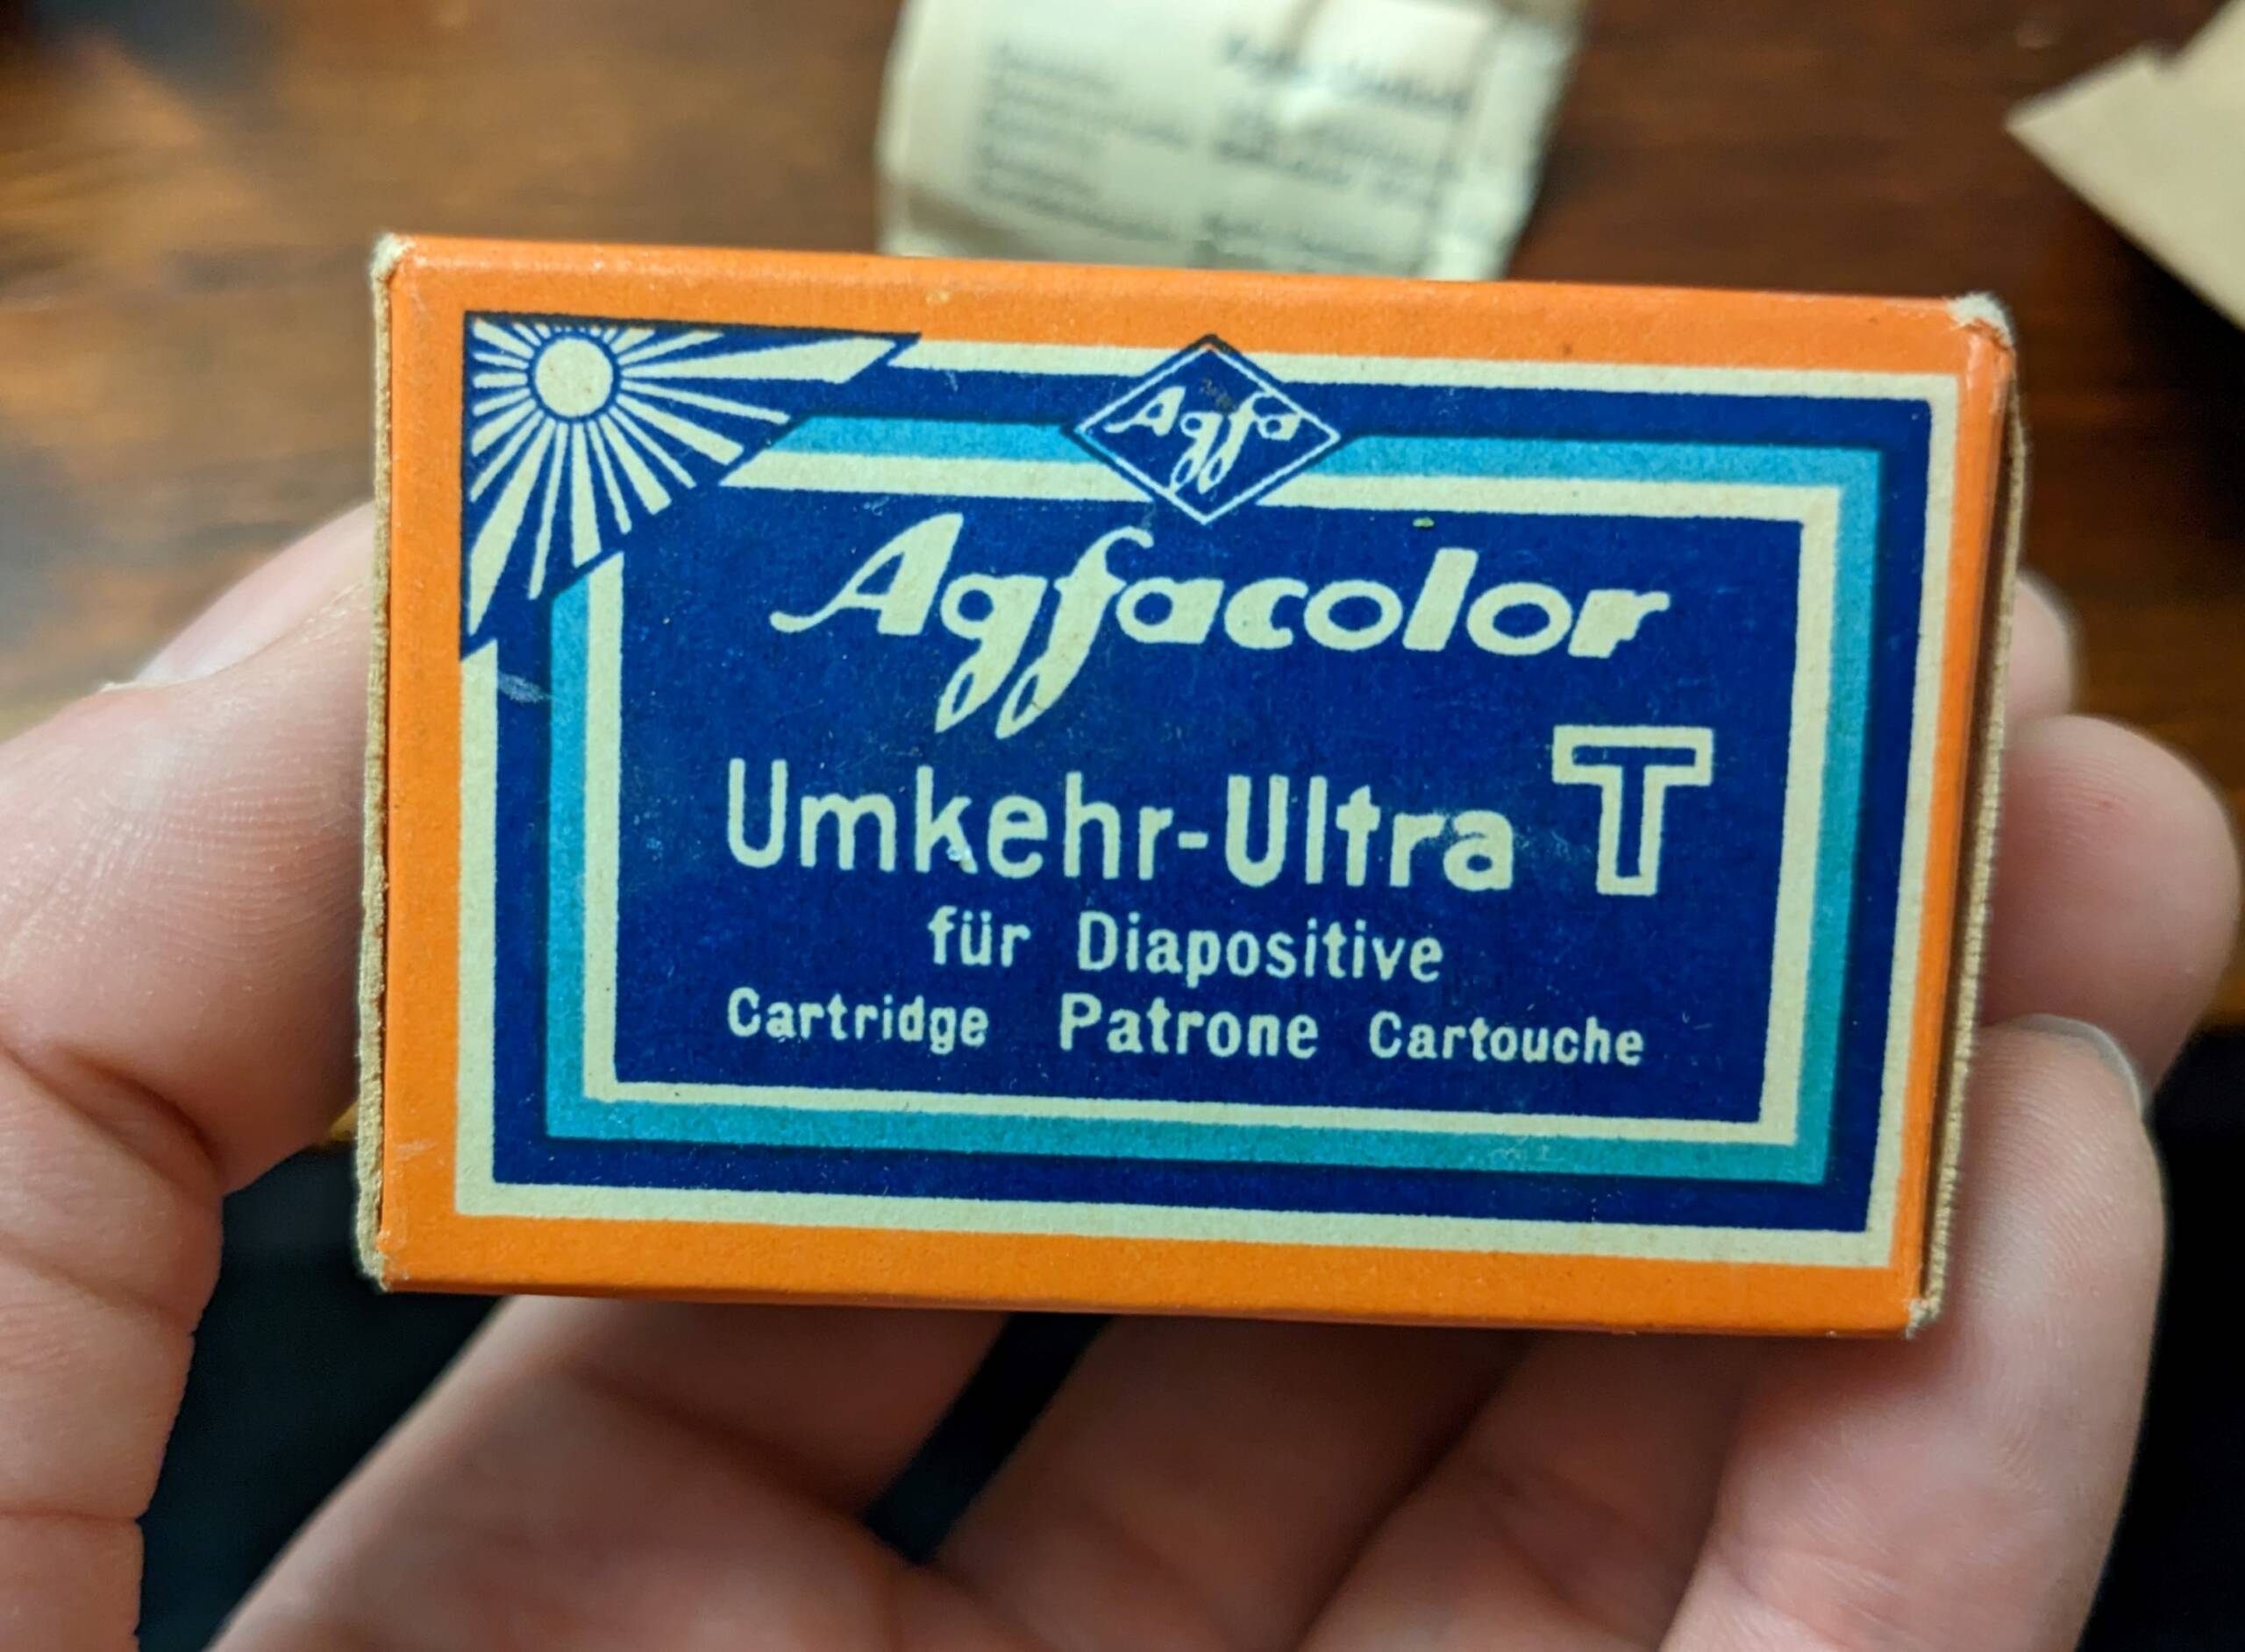 Agfacolor Umkehr Ultra T (1960) in Farbe entwickeln